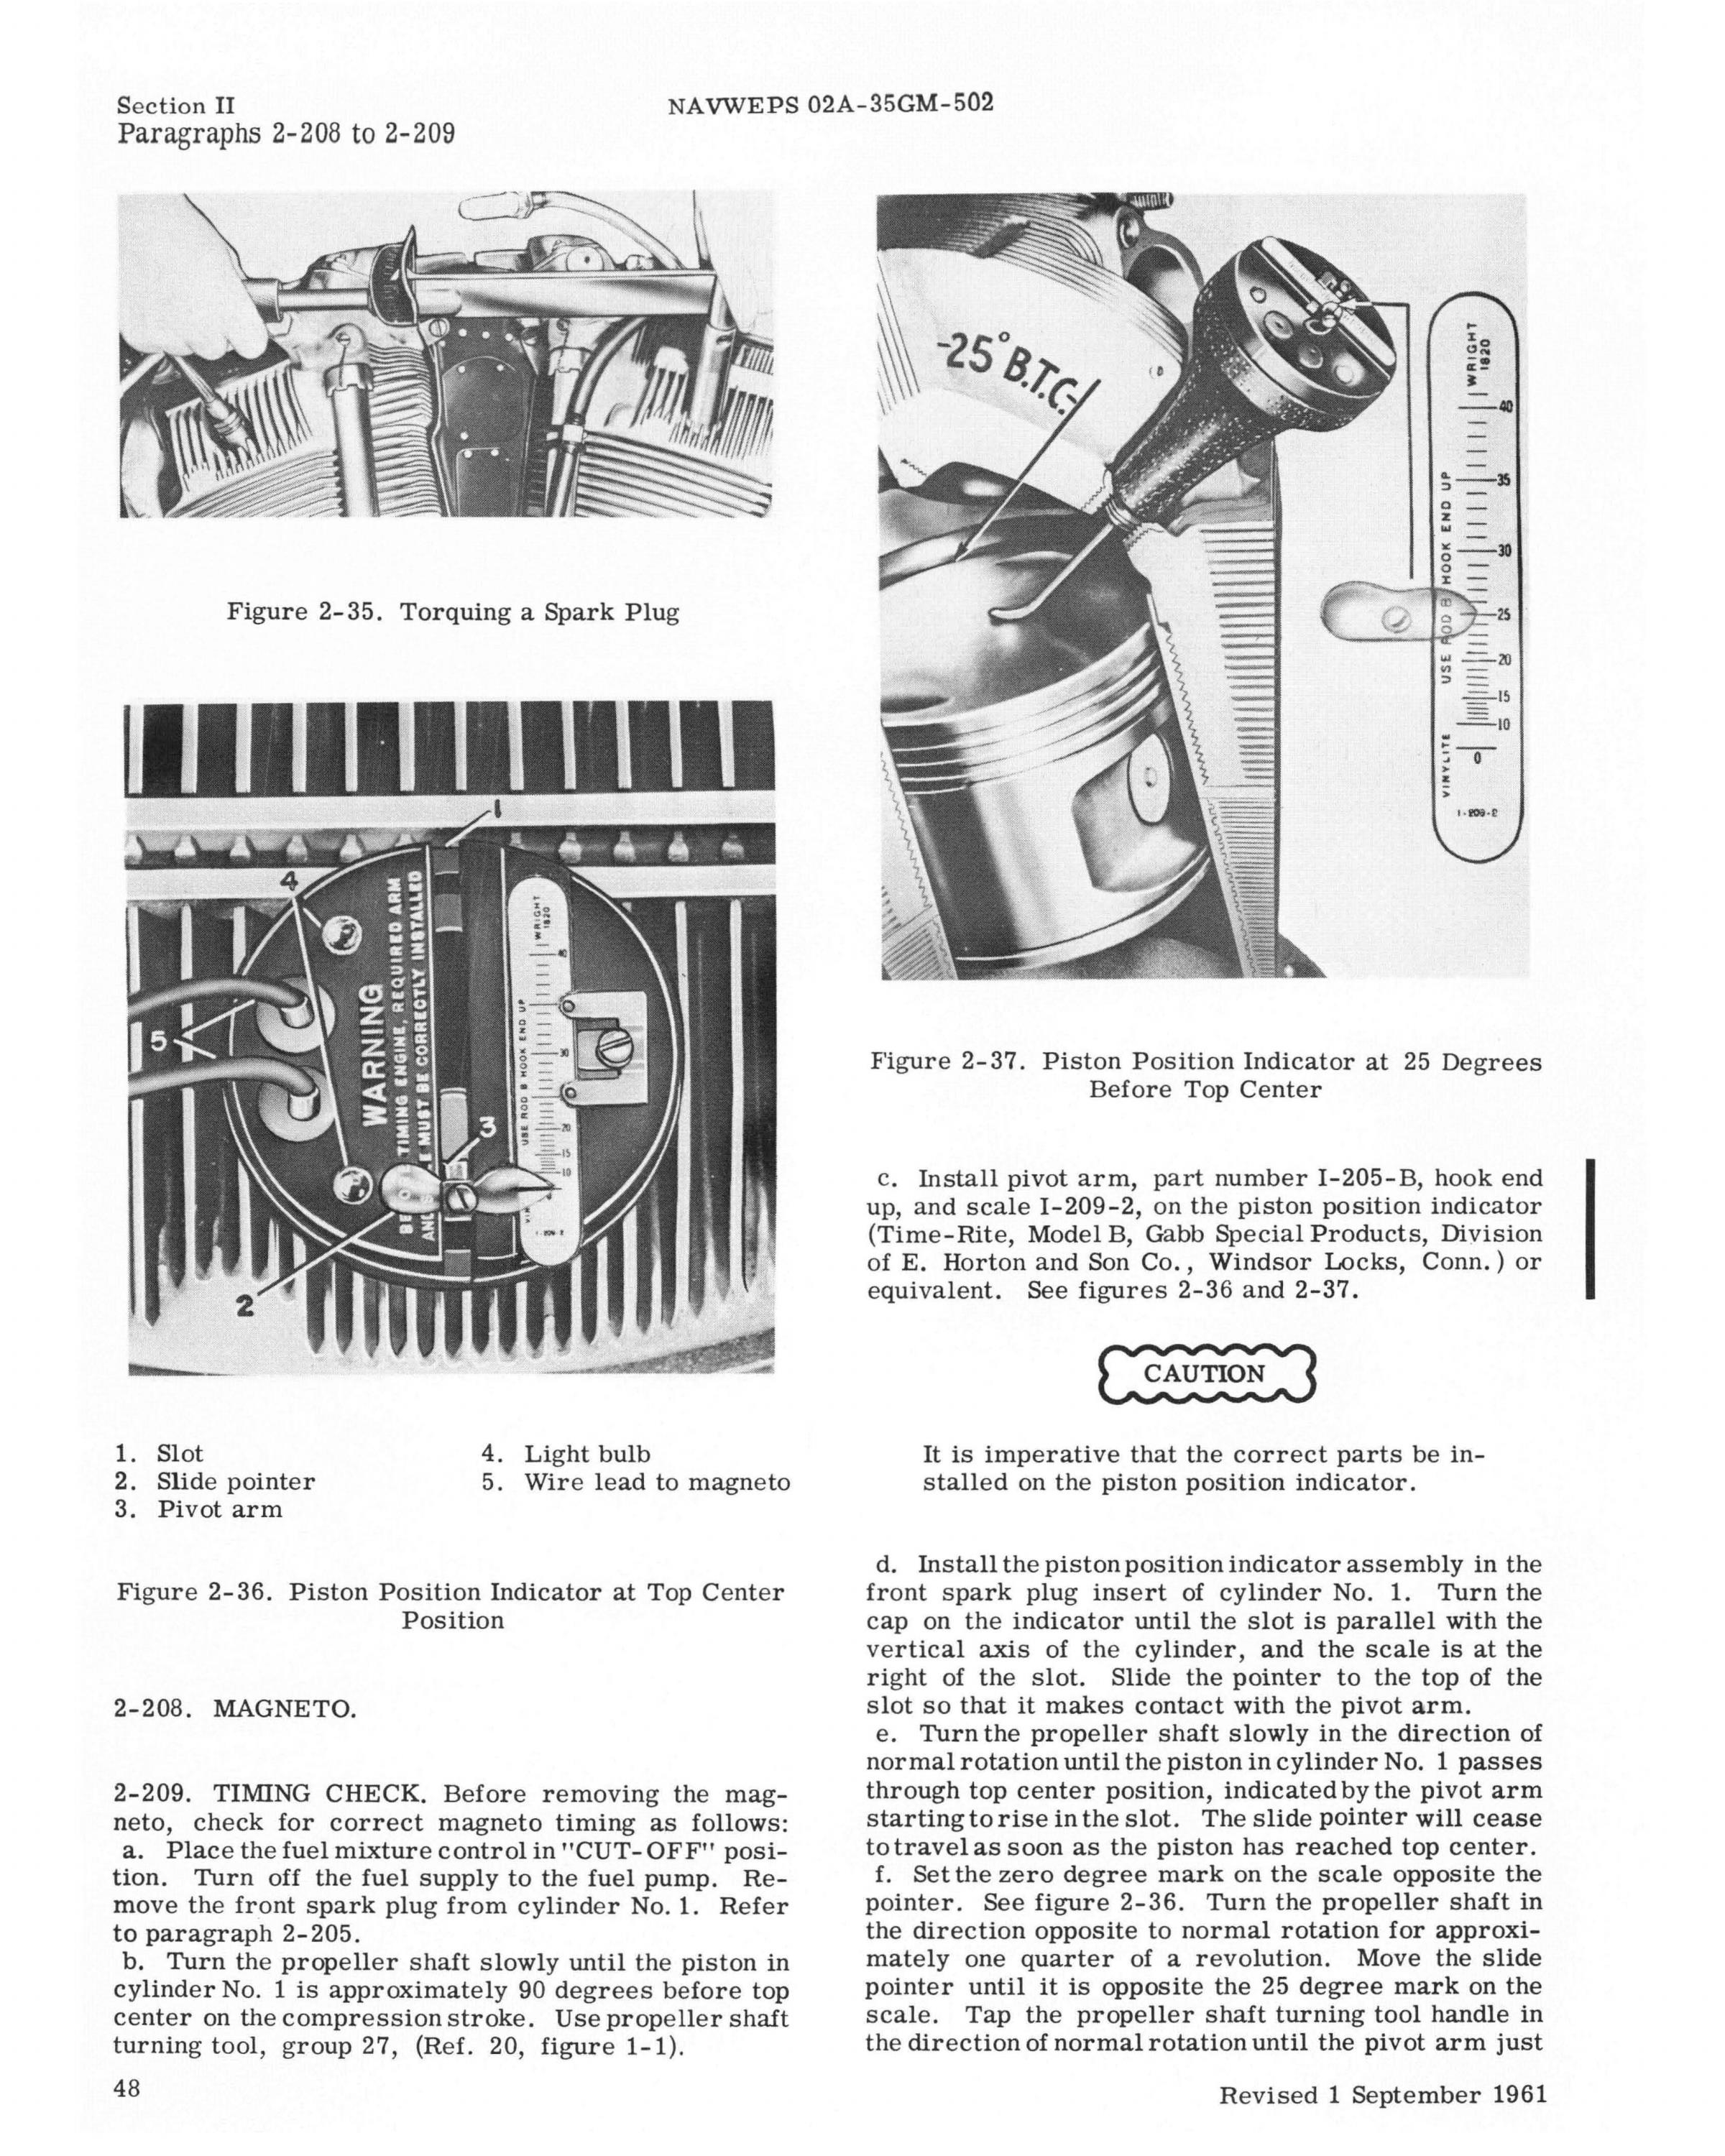 Sample page 6 from AirCorps Library document: Service Instructions for R-1820-84, -84A, and -84B Aircraft Engines